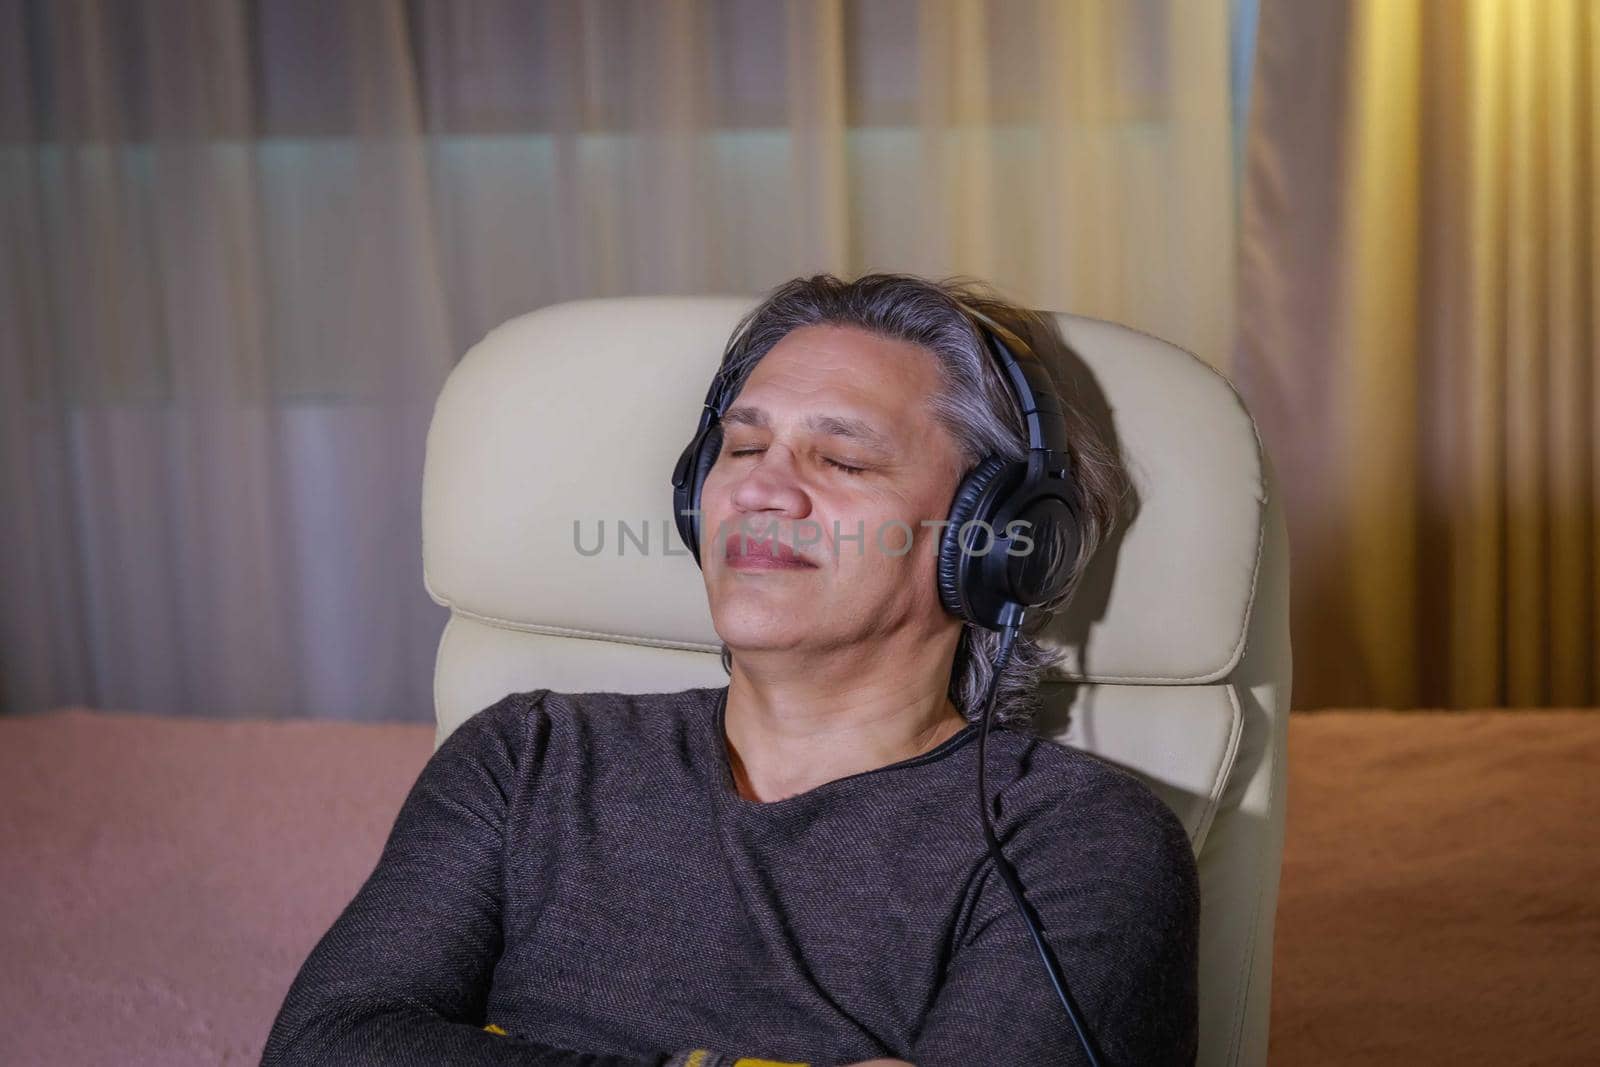 50-year-old man listens to music on headphones at home, sitting in a chair. by Yurich32